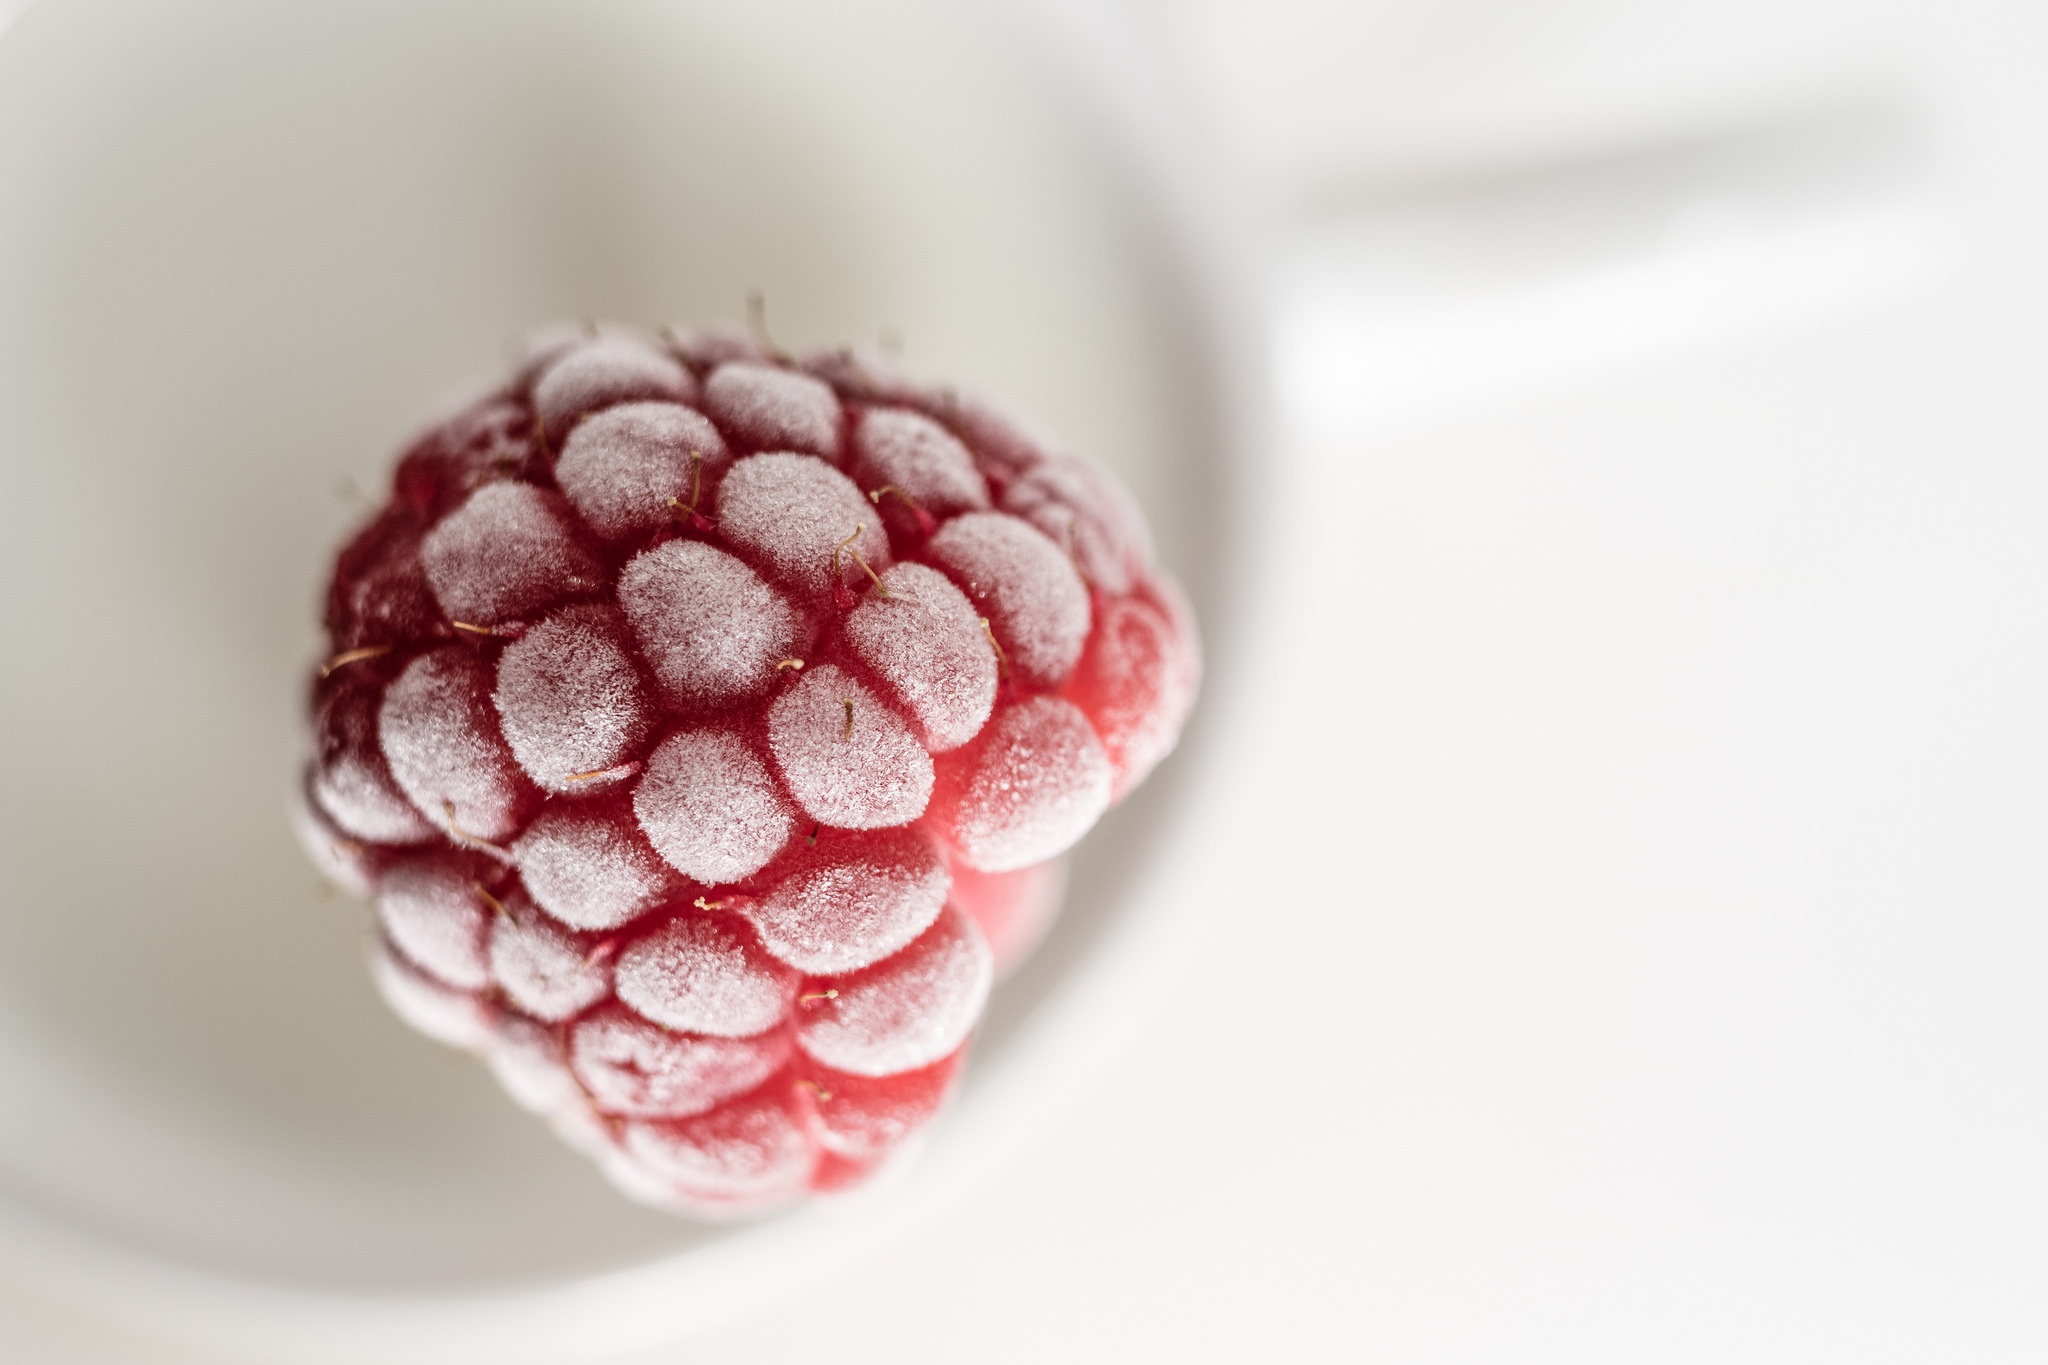 General 2048x1365 red white food fruit macro white background frost raspberries